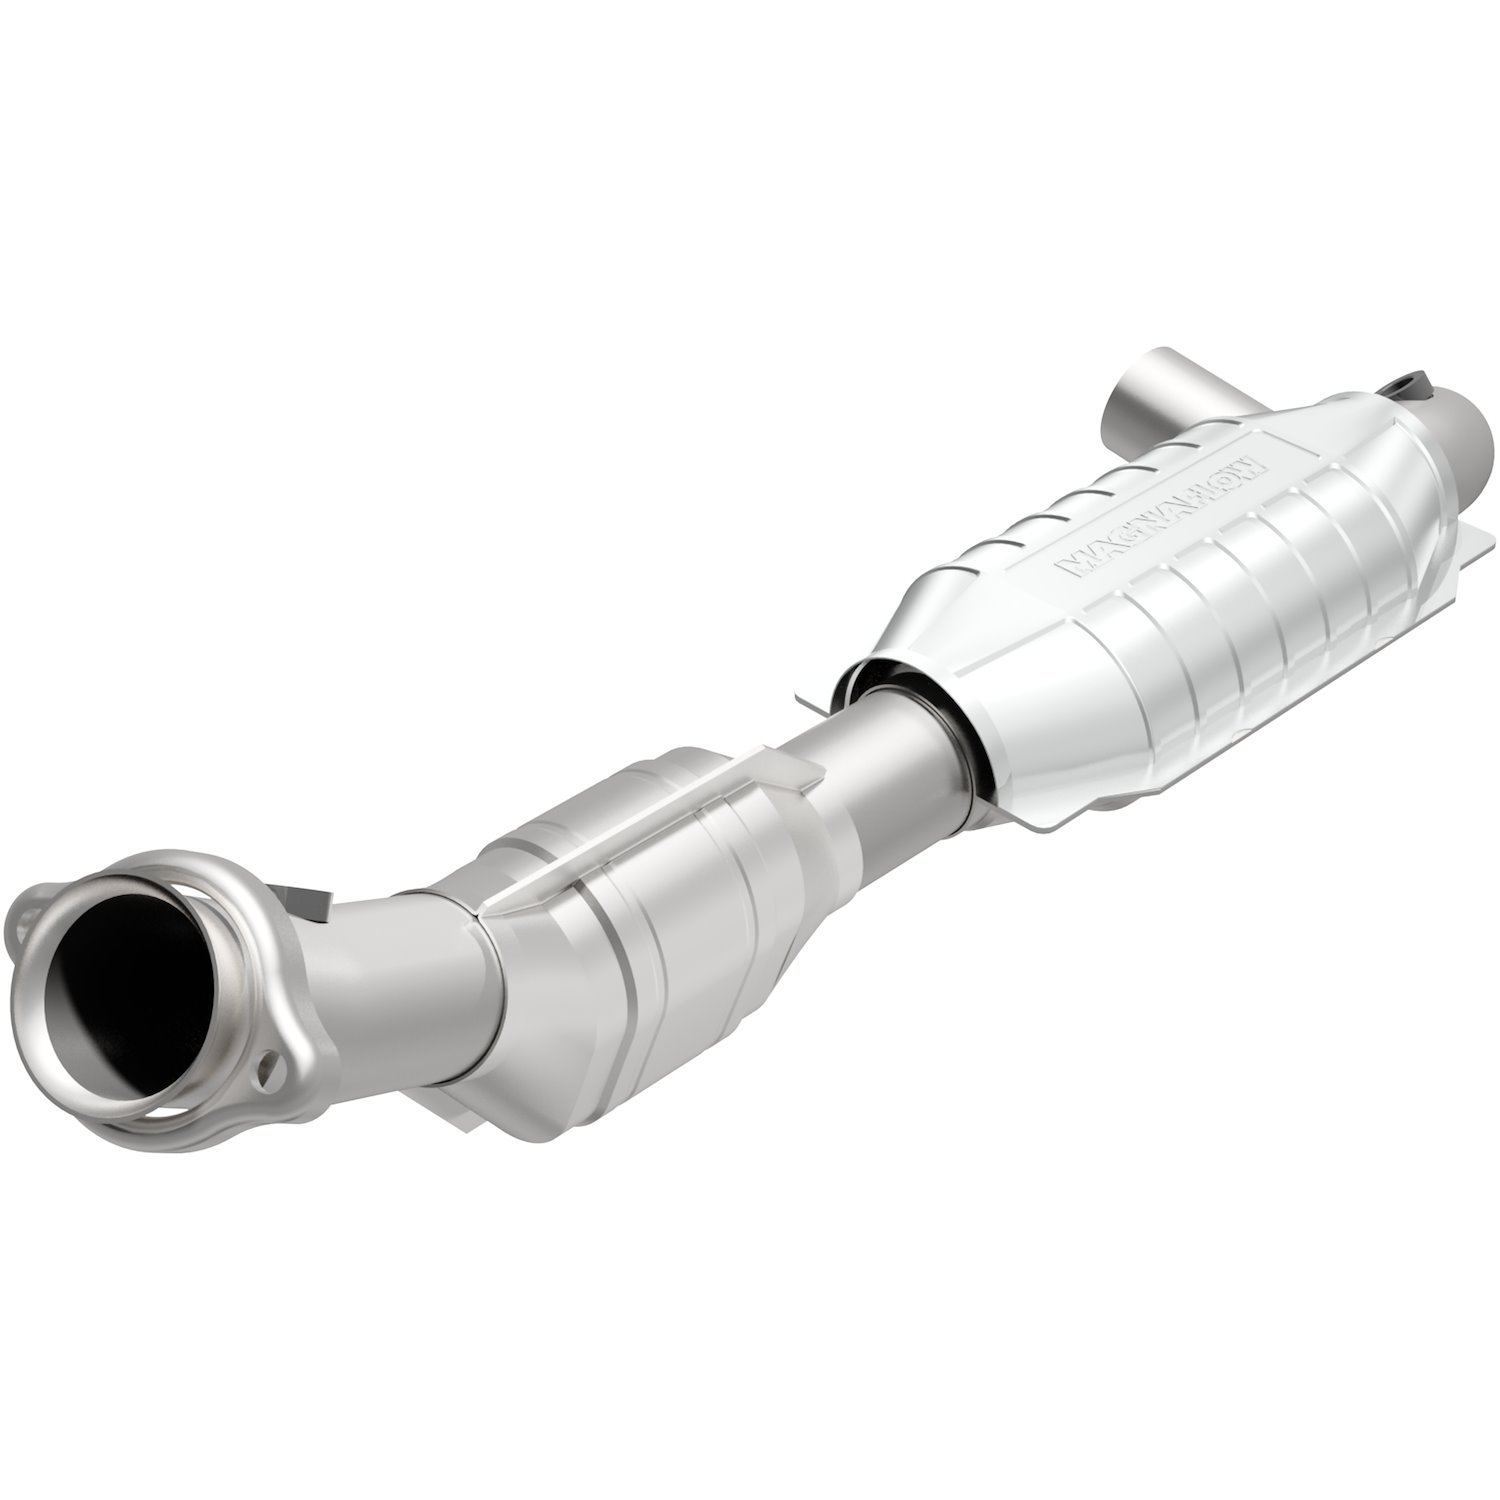 California Grade CARB Compliant Direct-Fit Catalytic Converter 447133